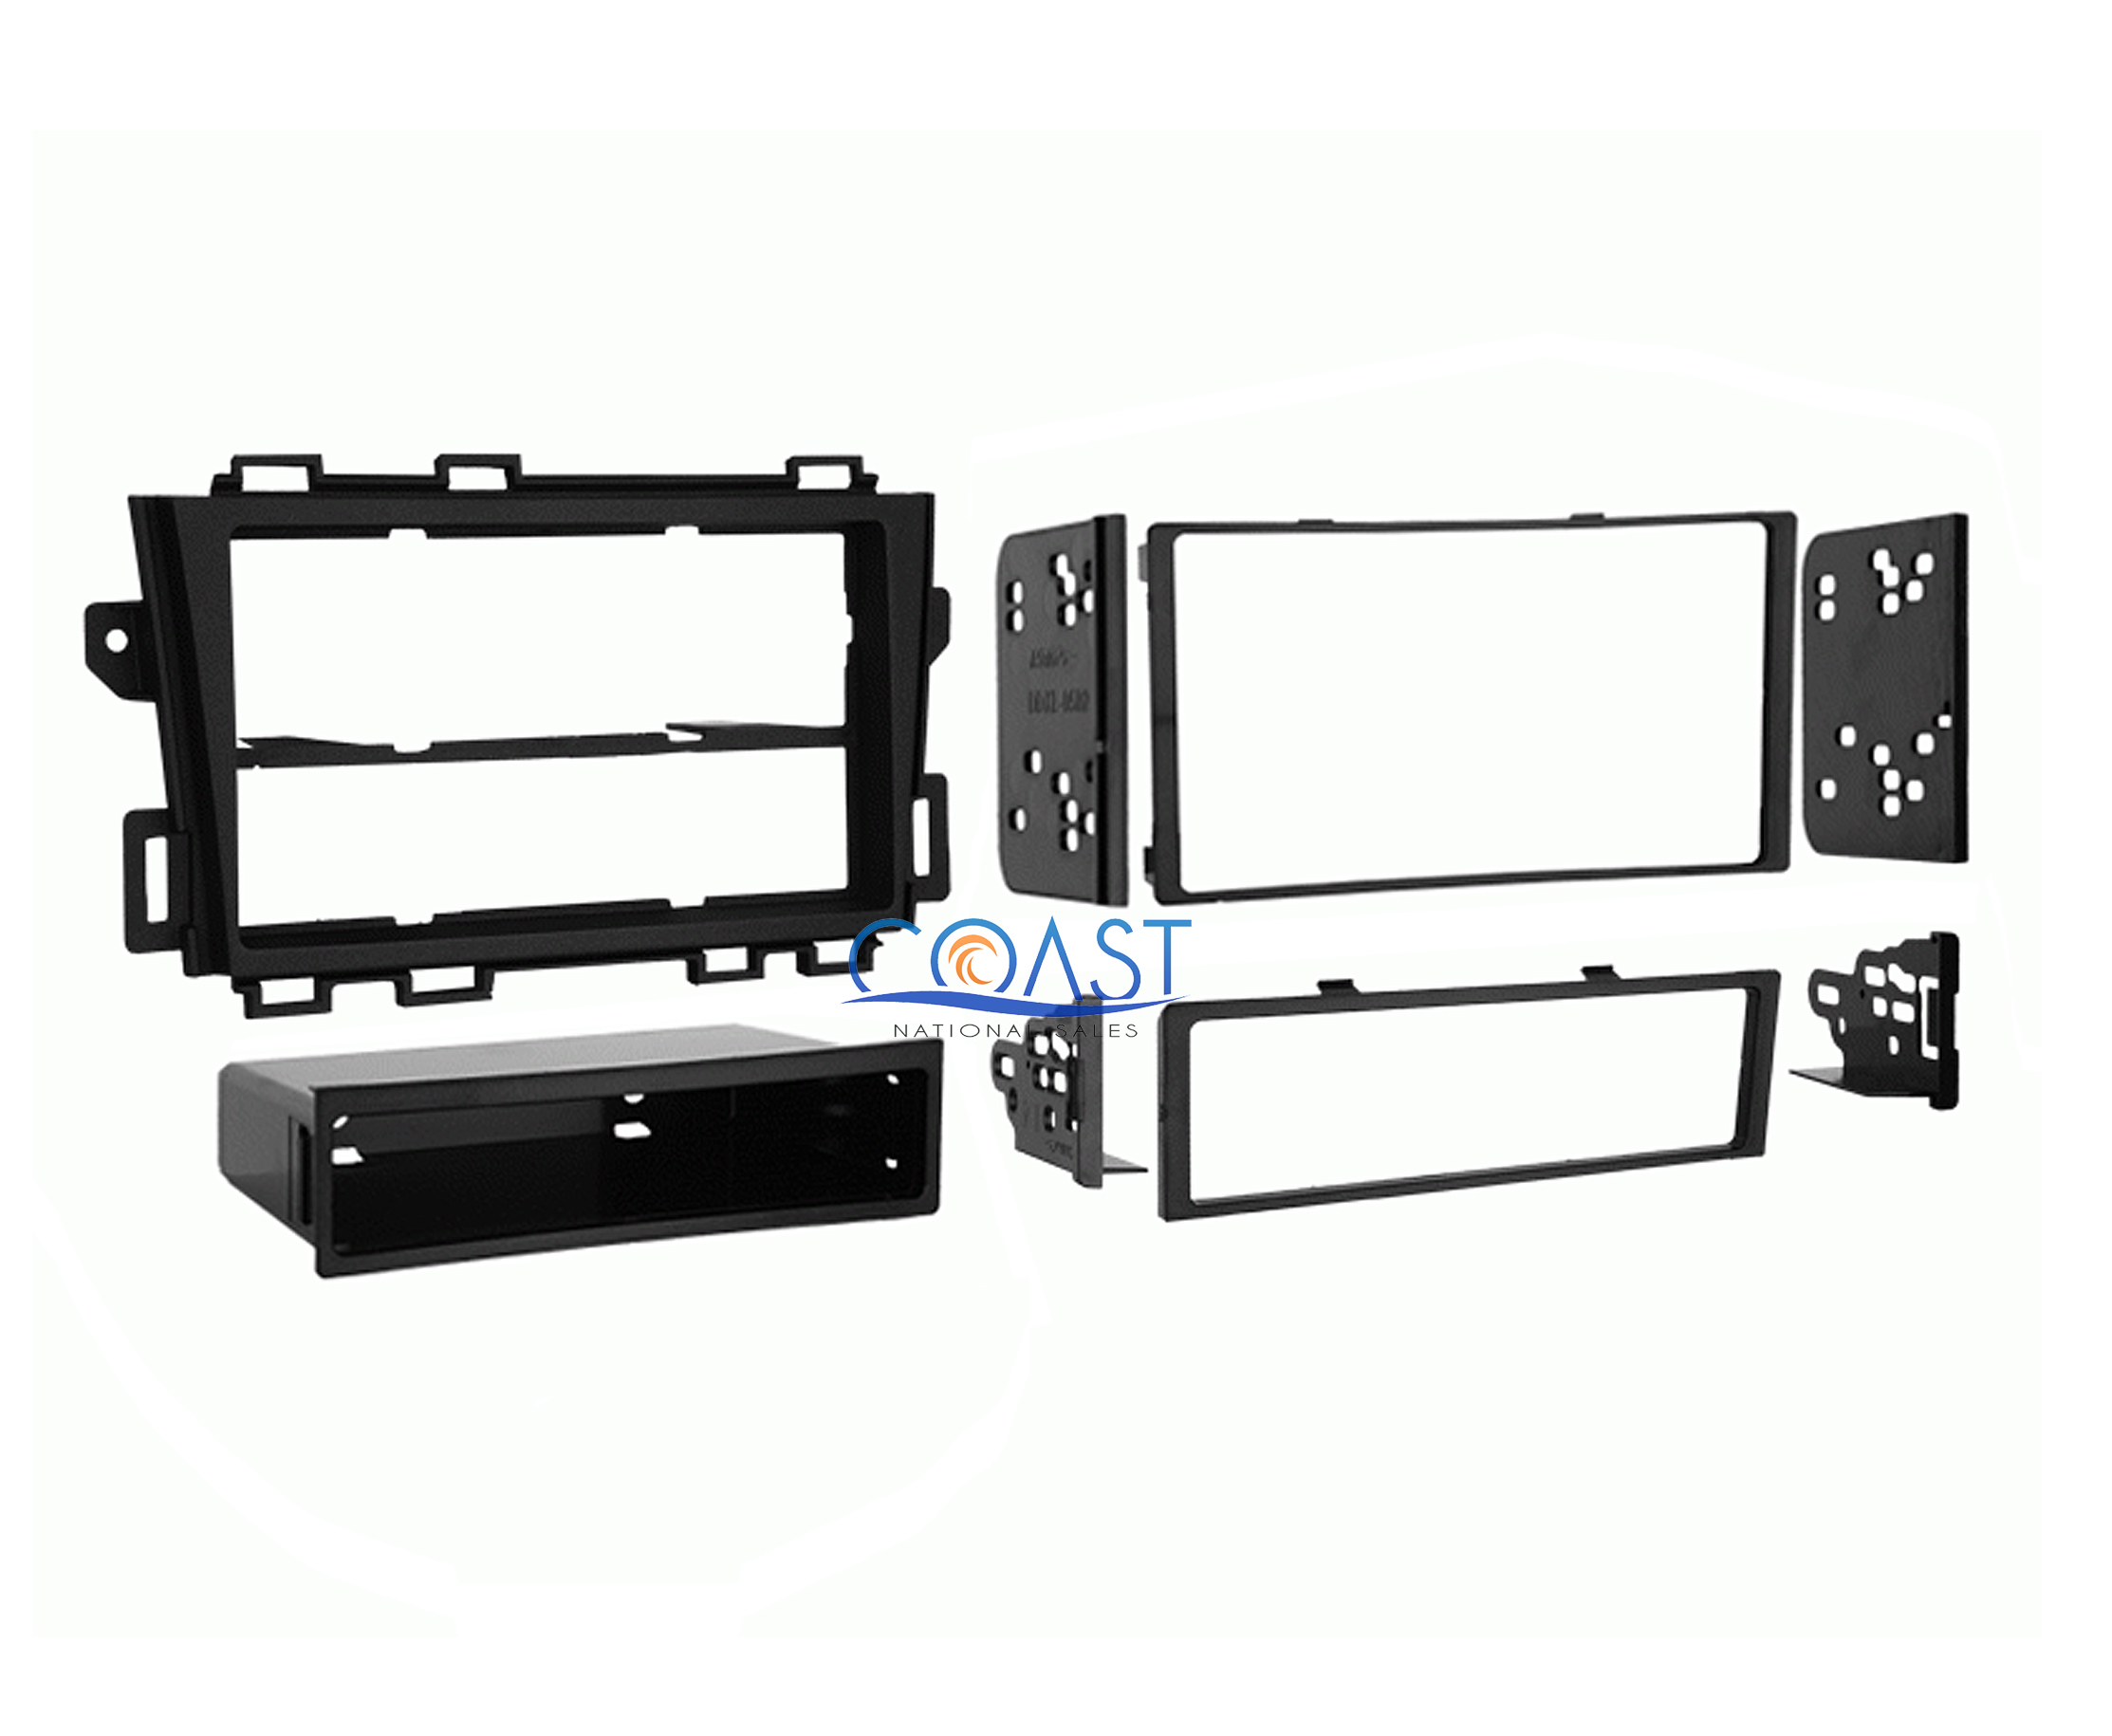 Metra 99 7426 Single Double DIN Install Dash Kit for 2009 Nissan Murano